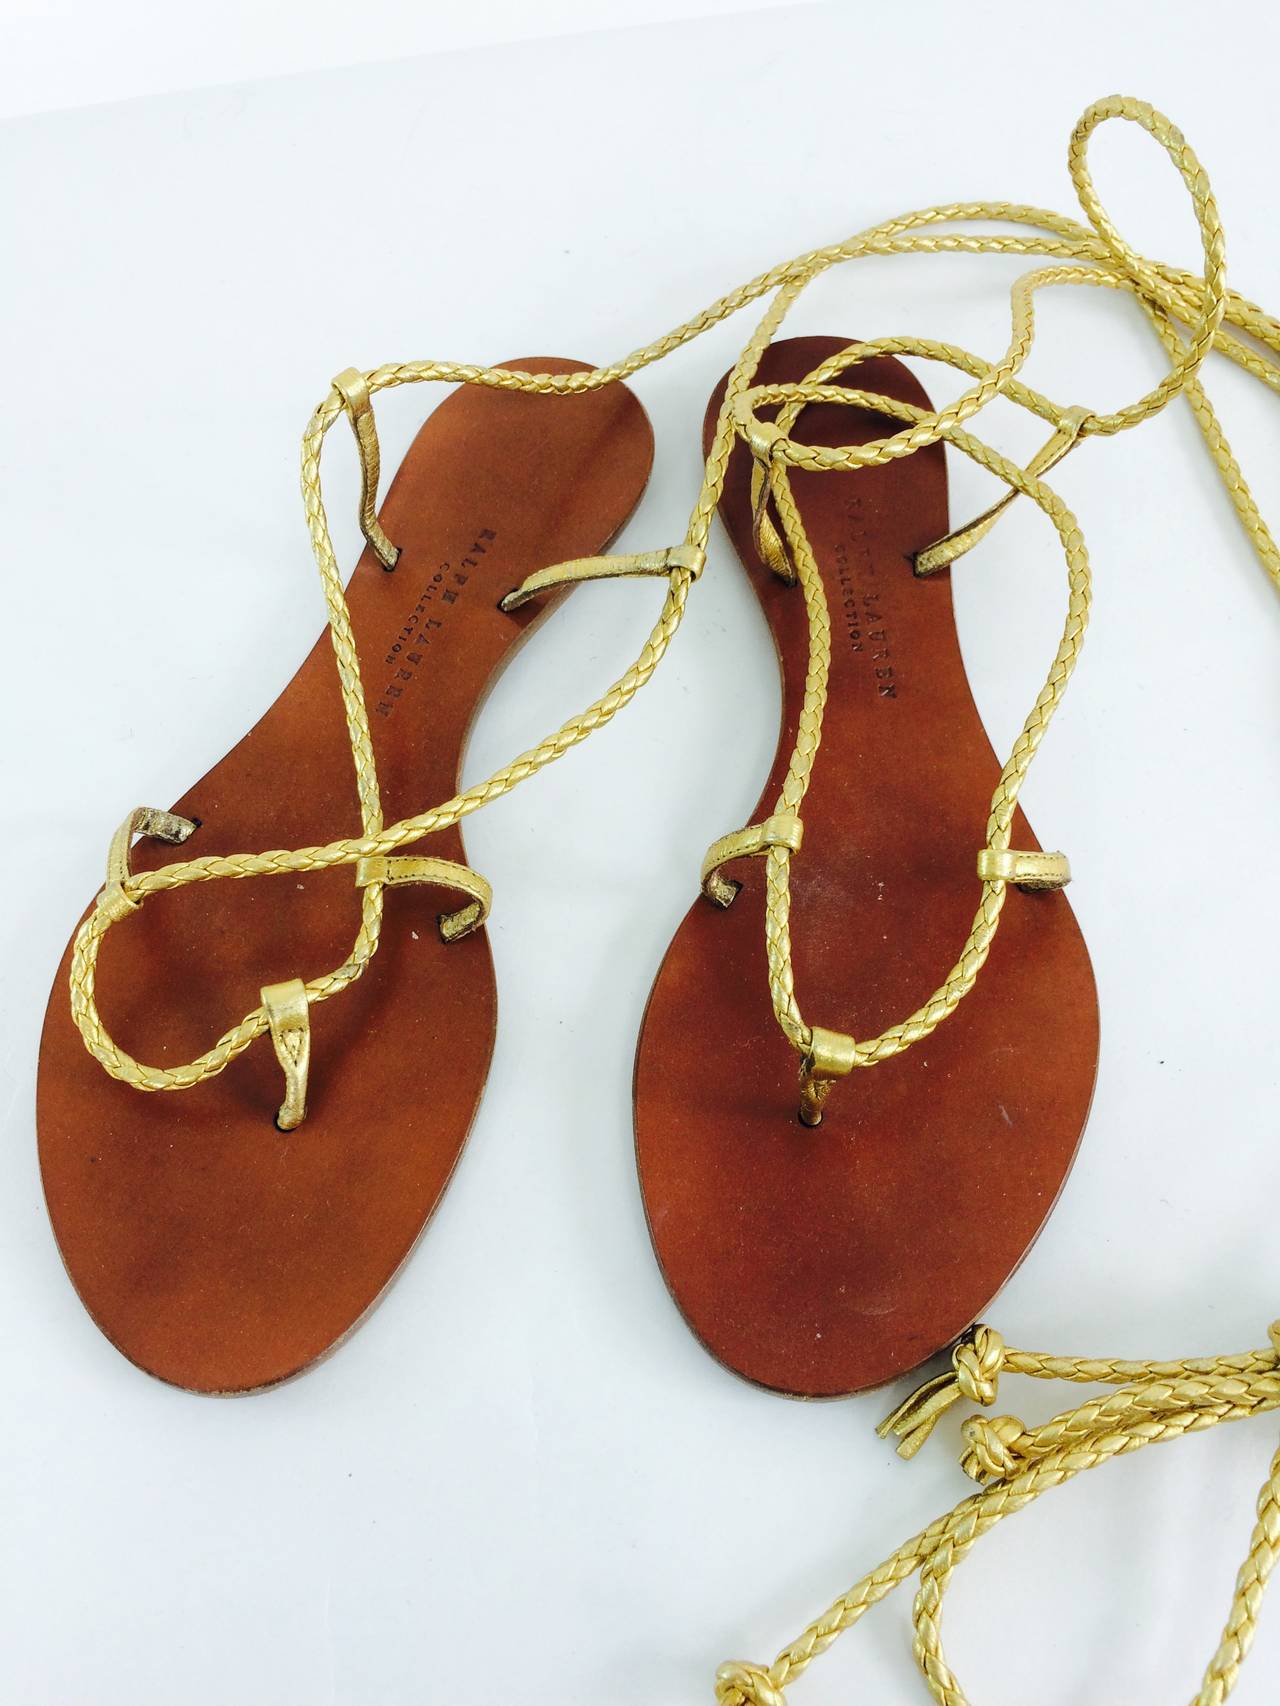 Ralph Lauren Collection gold leather gladiator thong sandals, leather soles, braided gold leather cords and laces  6 1/2 B, in excellent condition with some sole wear